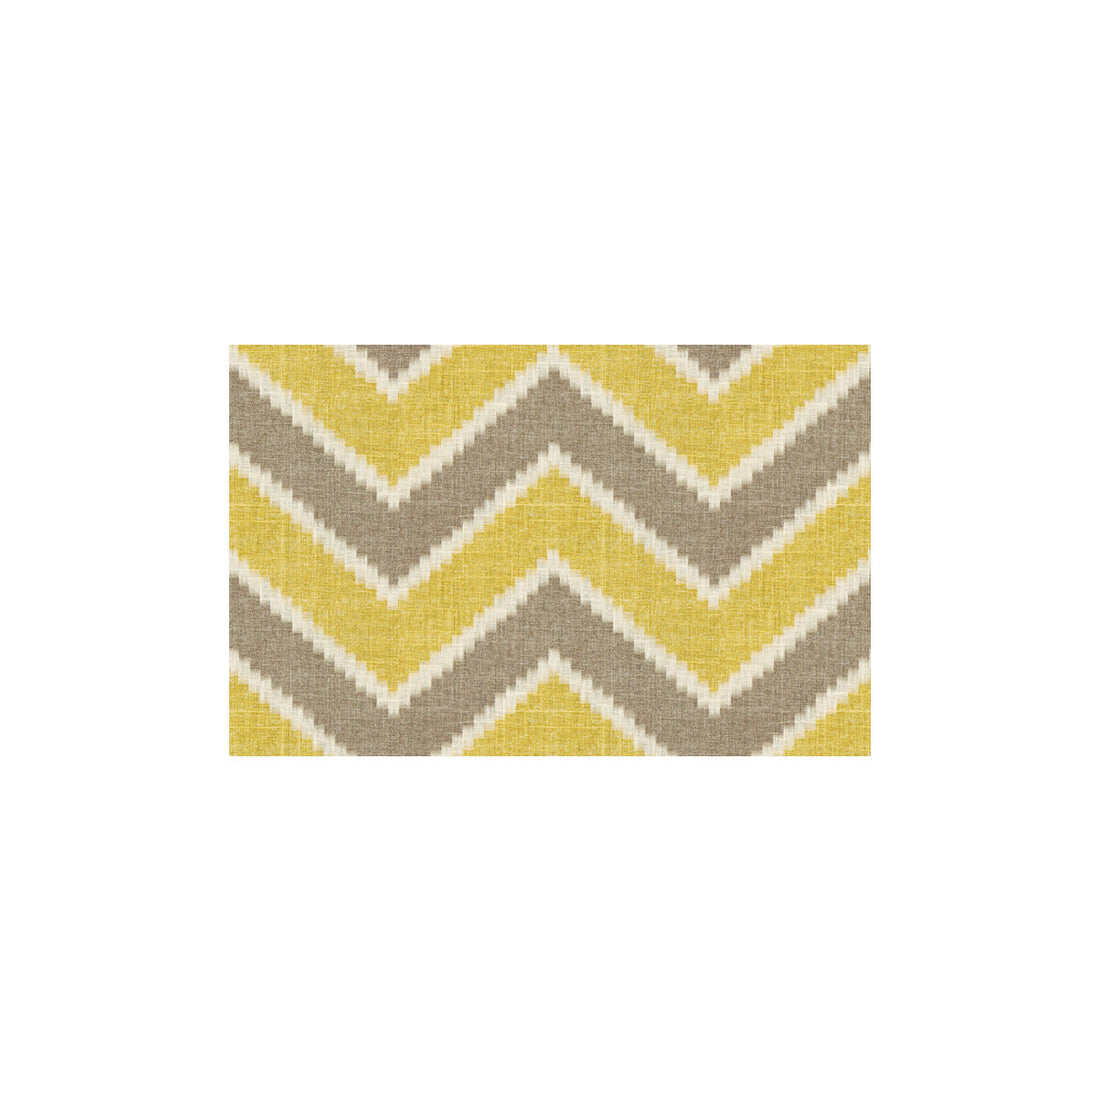 Amani fabric in taupe/yellow color - pattern PP50378.2.0 - by Baker Lifestyle in the Echo II collection